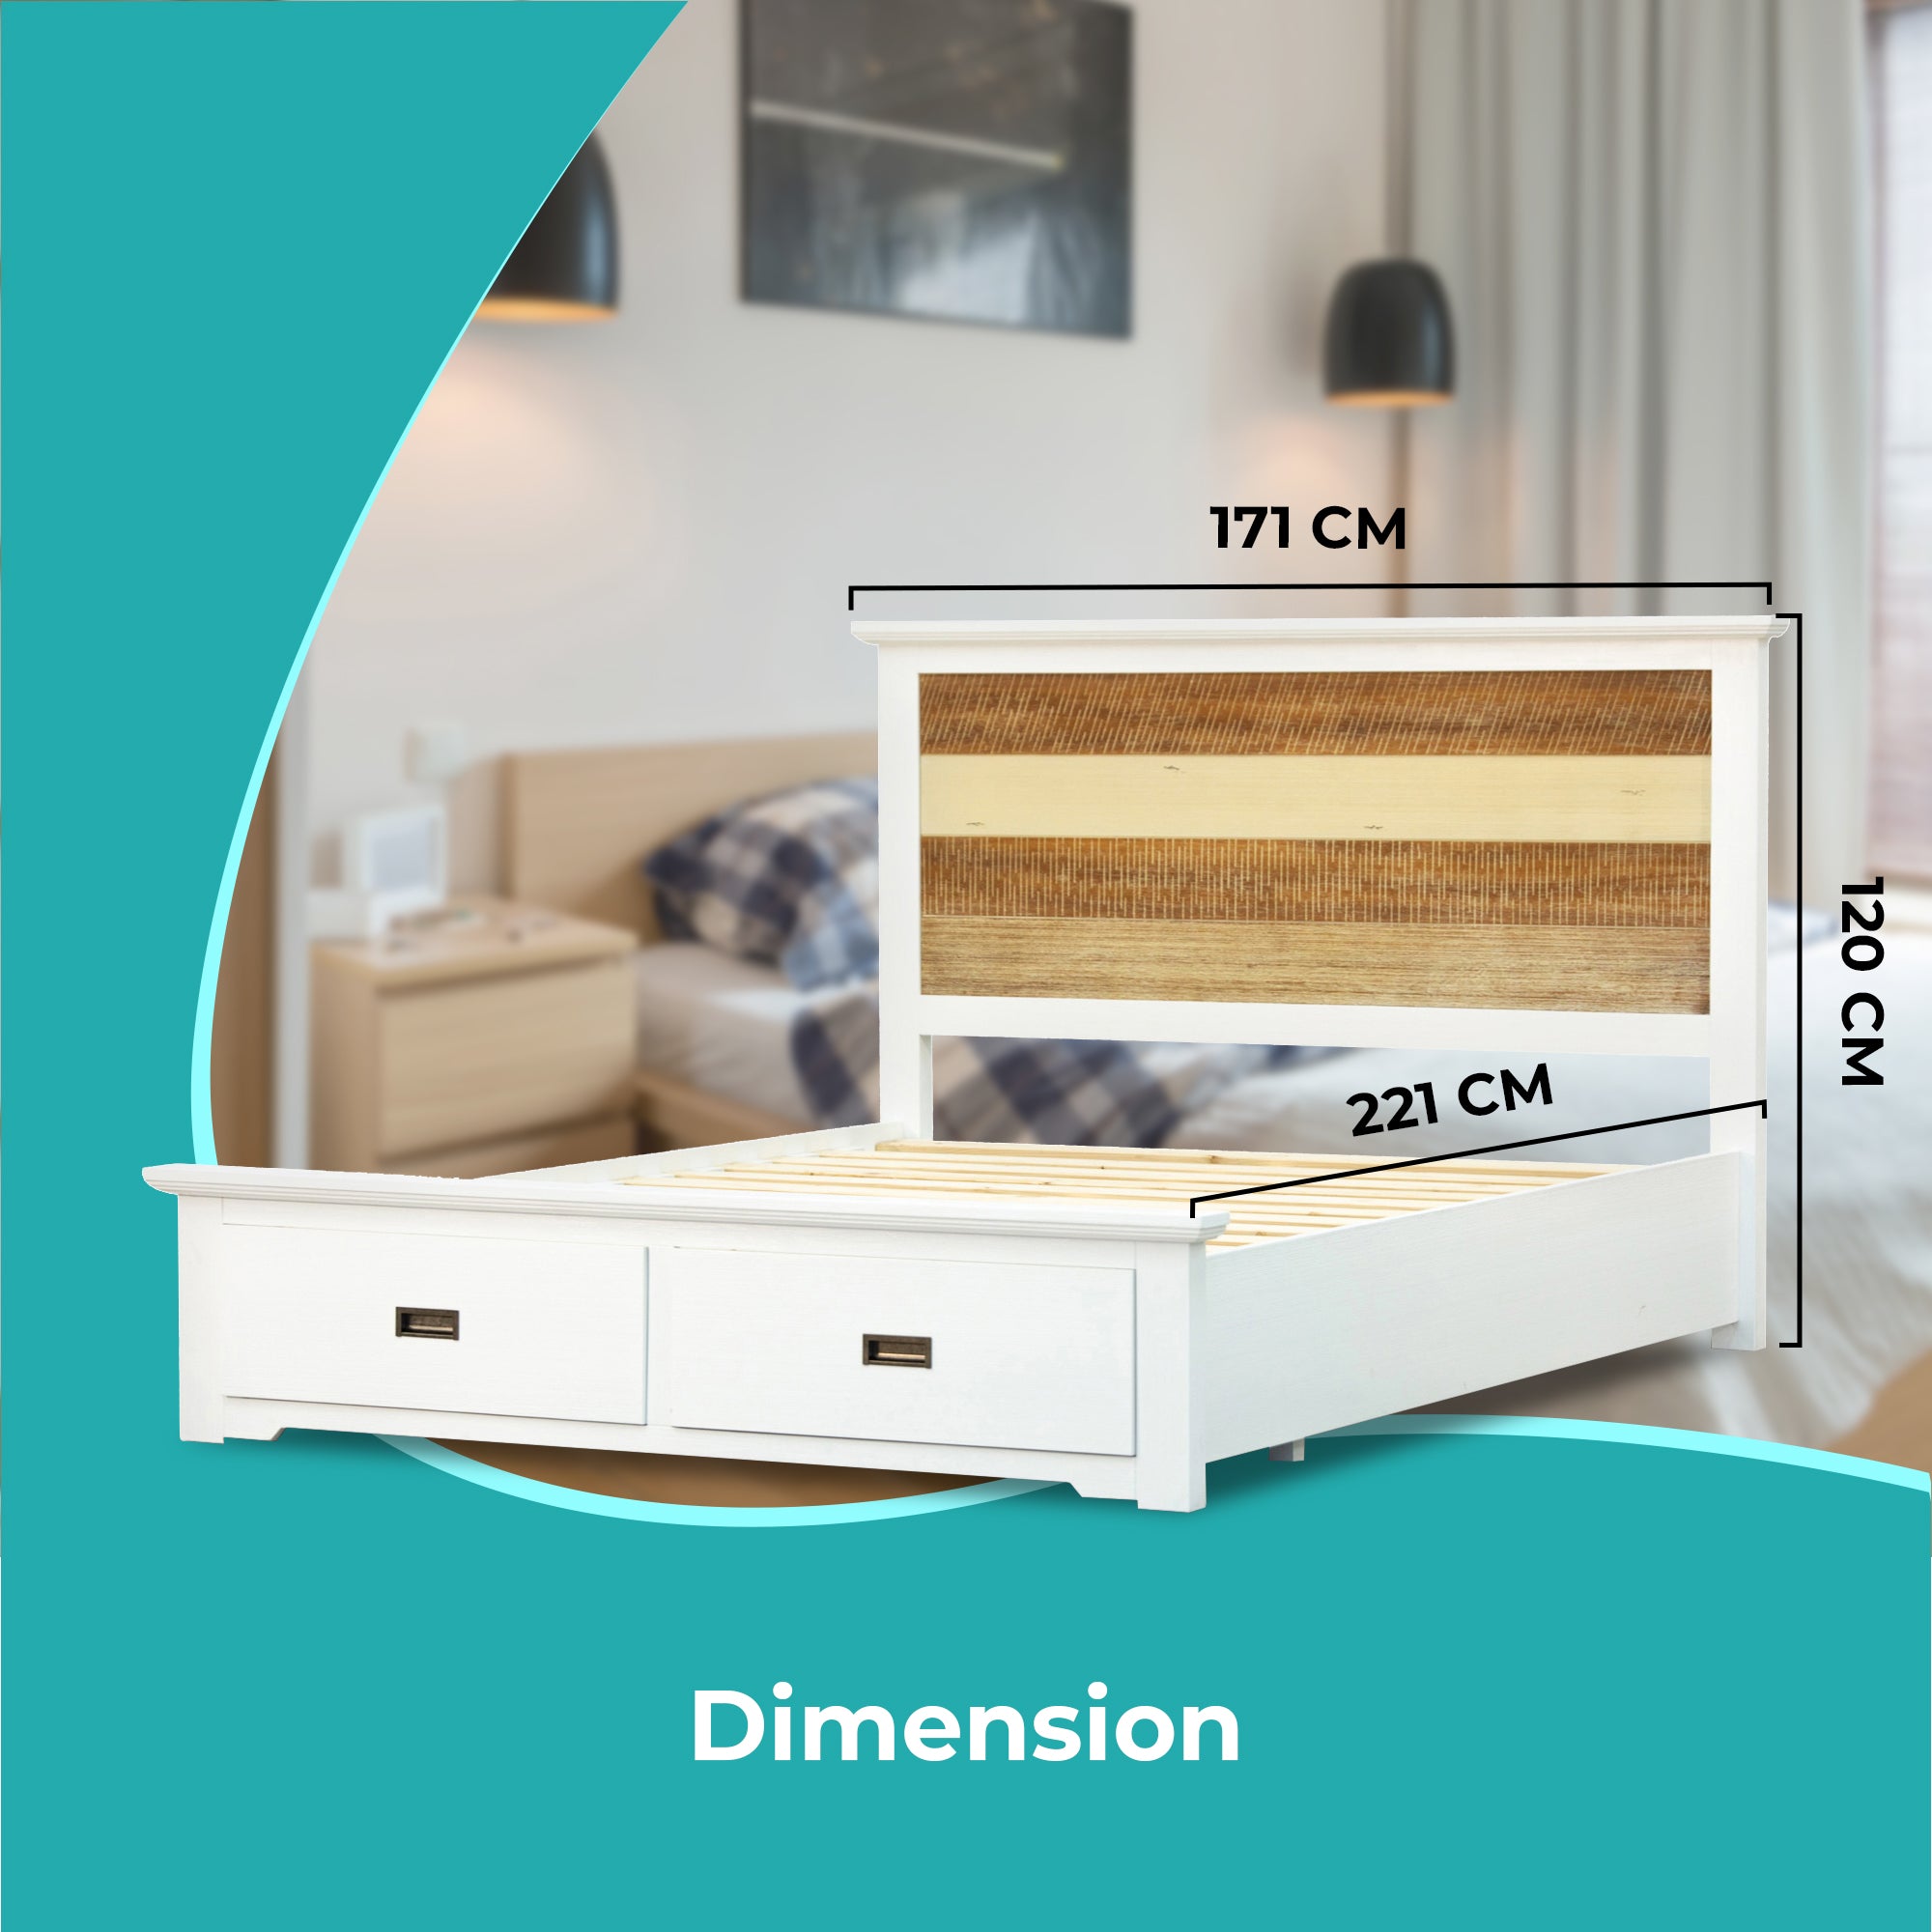 Multifunctional Queen Size Mattress Base with Colorful Storage Drawers